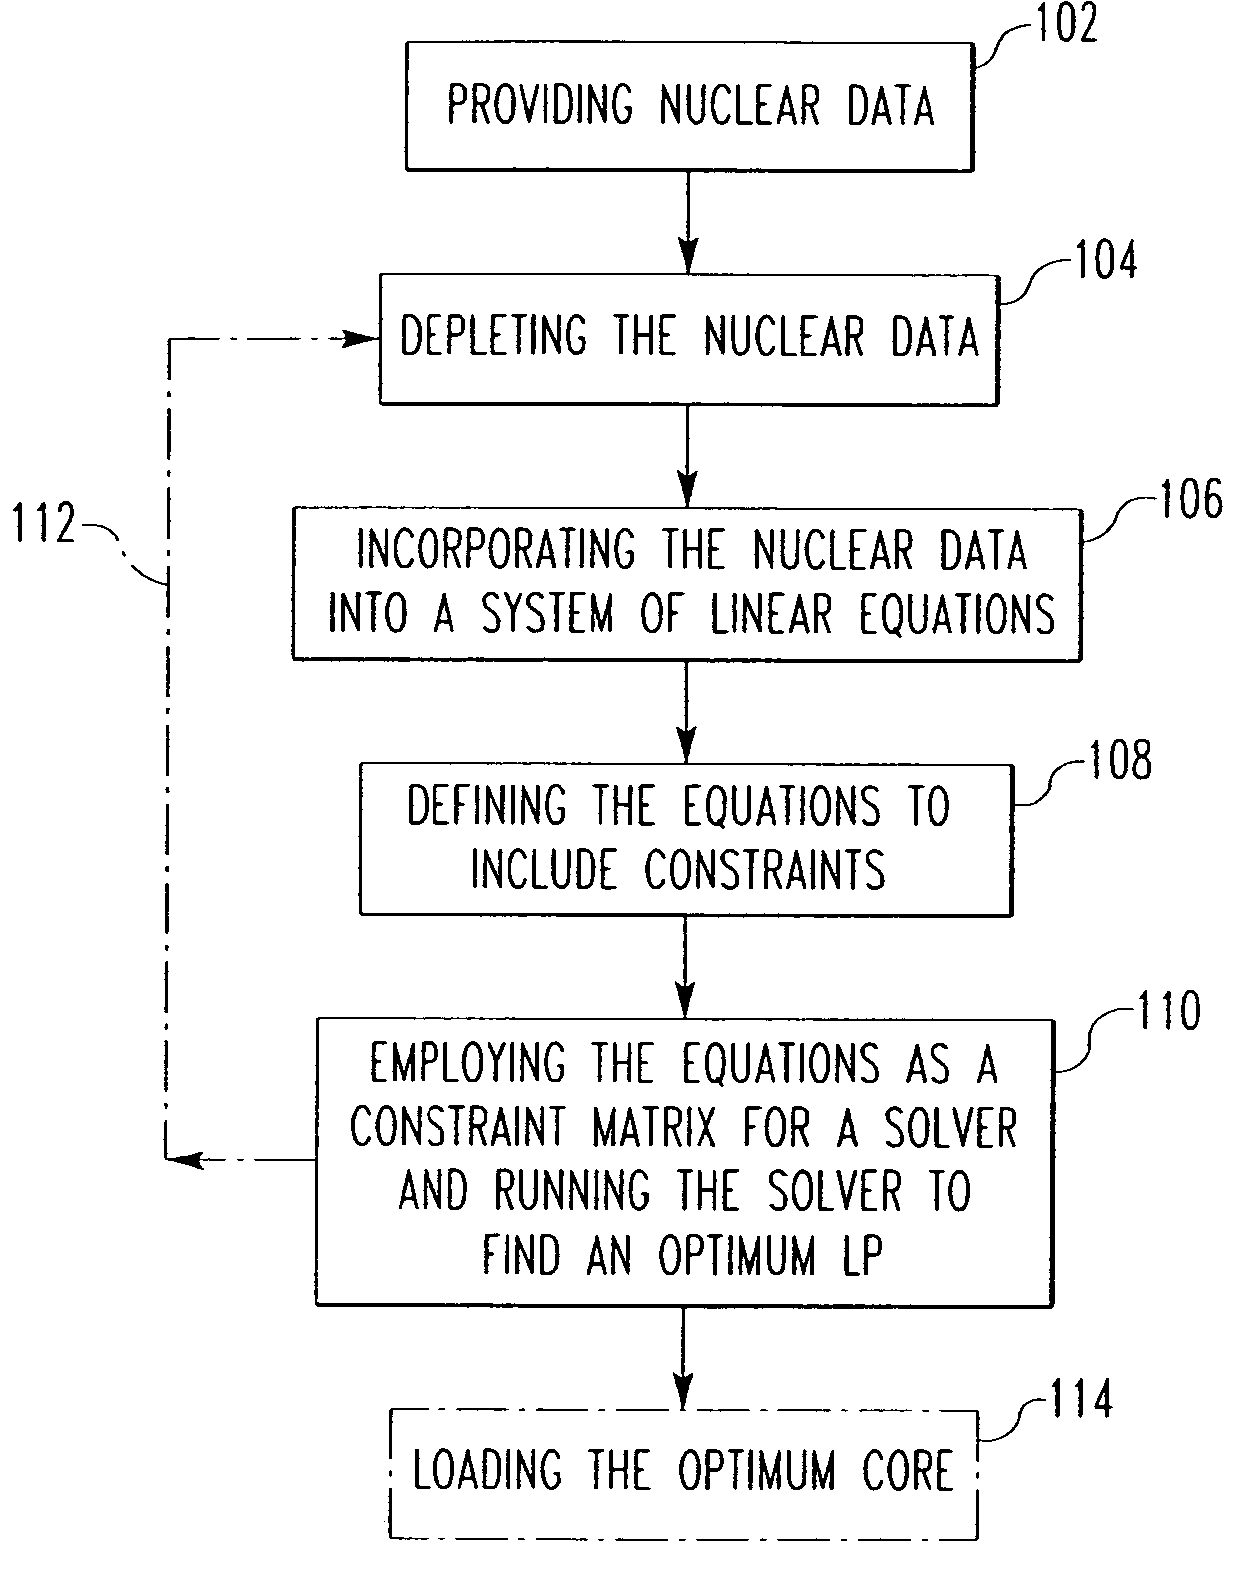 Method and algorithm for searching and optimizing nuclear reactor core loading patterns